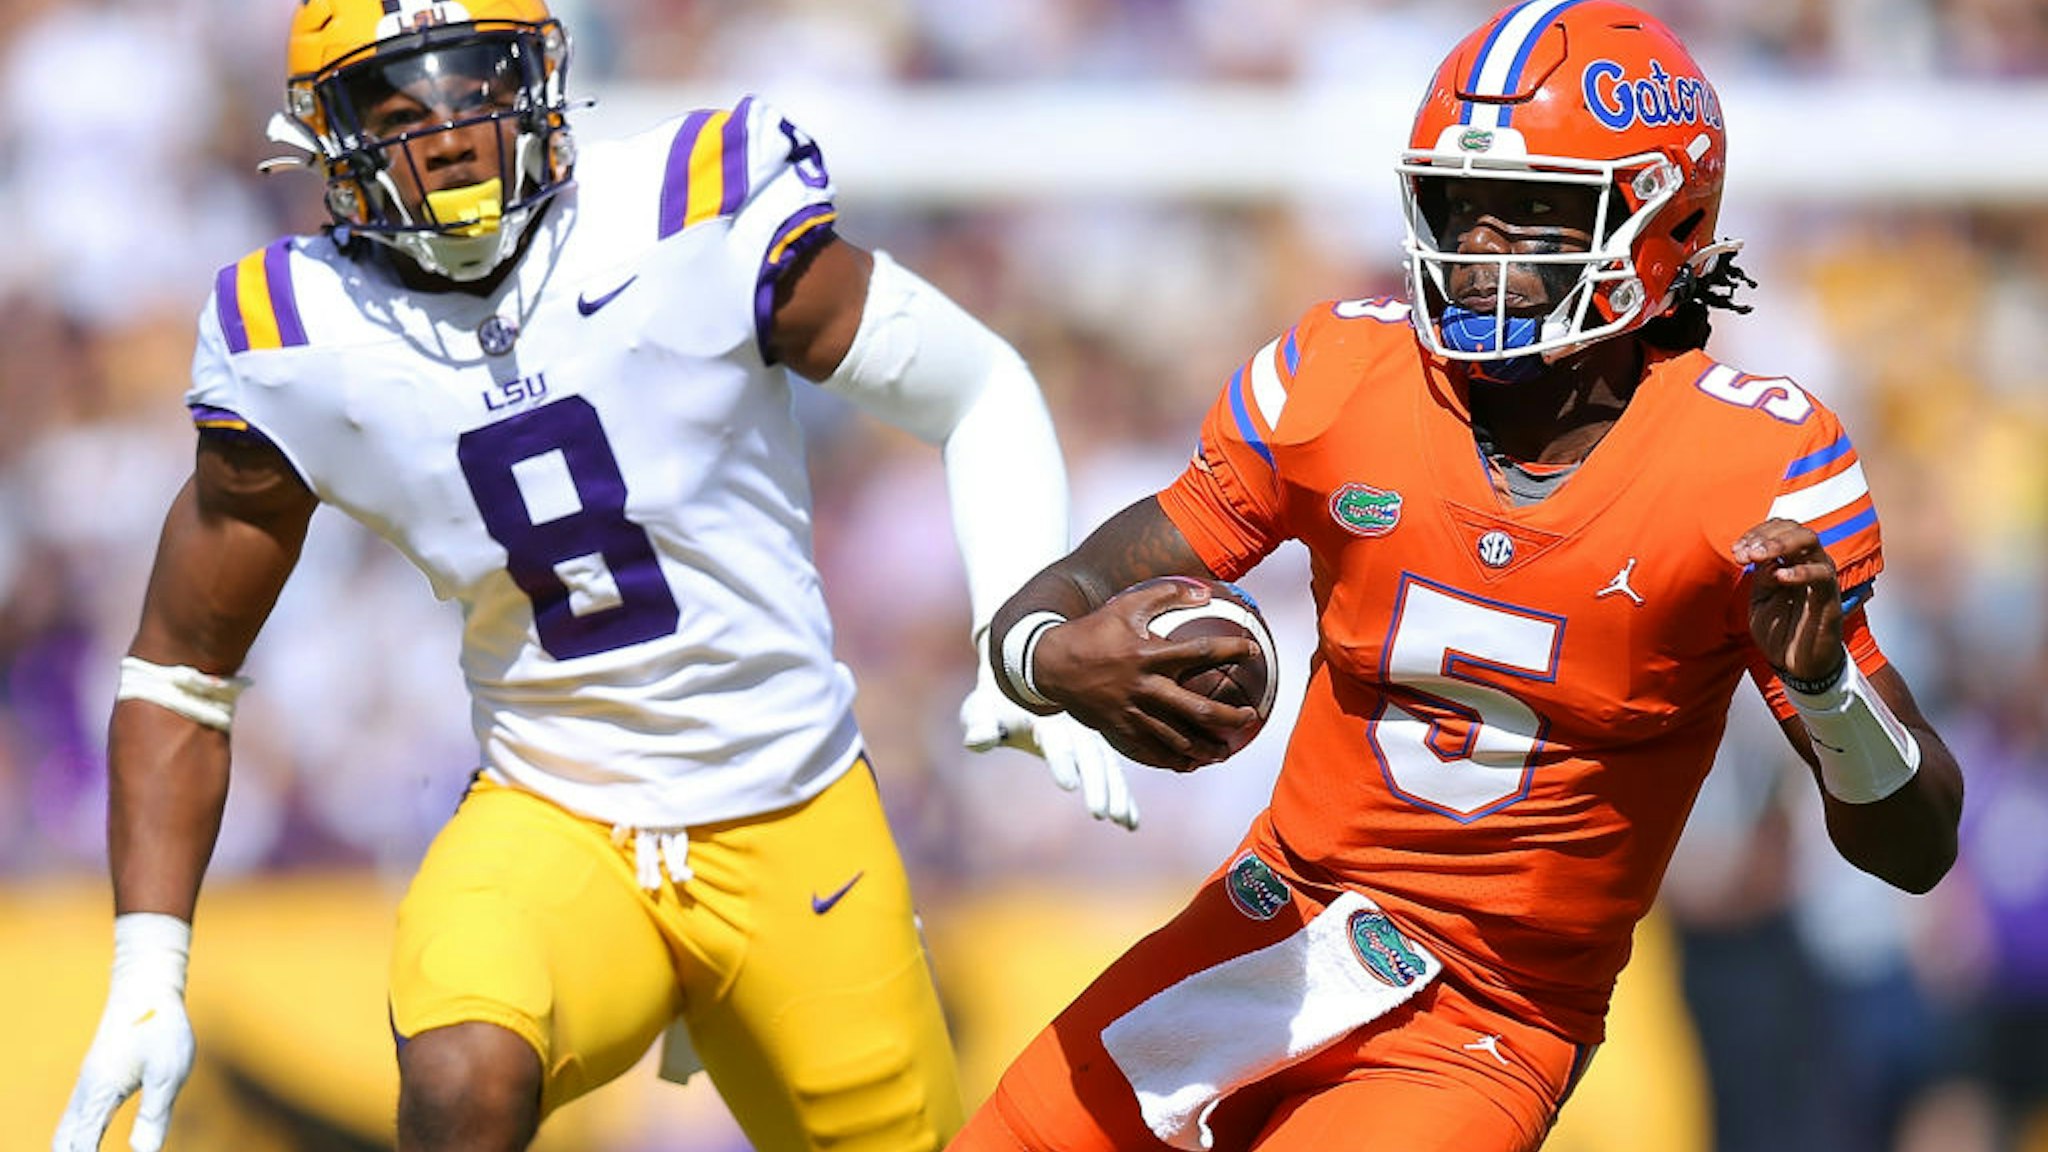 Emory Jones #5 of the Florida Gators runs with the ball as BJ Ojulari #8 of the LSU Tigers defends during the first half at Tiger Stadium on October 16, 2021 in Baton Rouge, Louisiana.